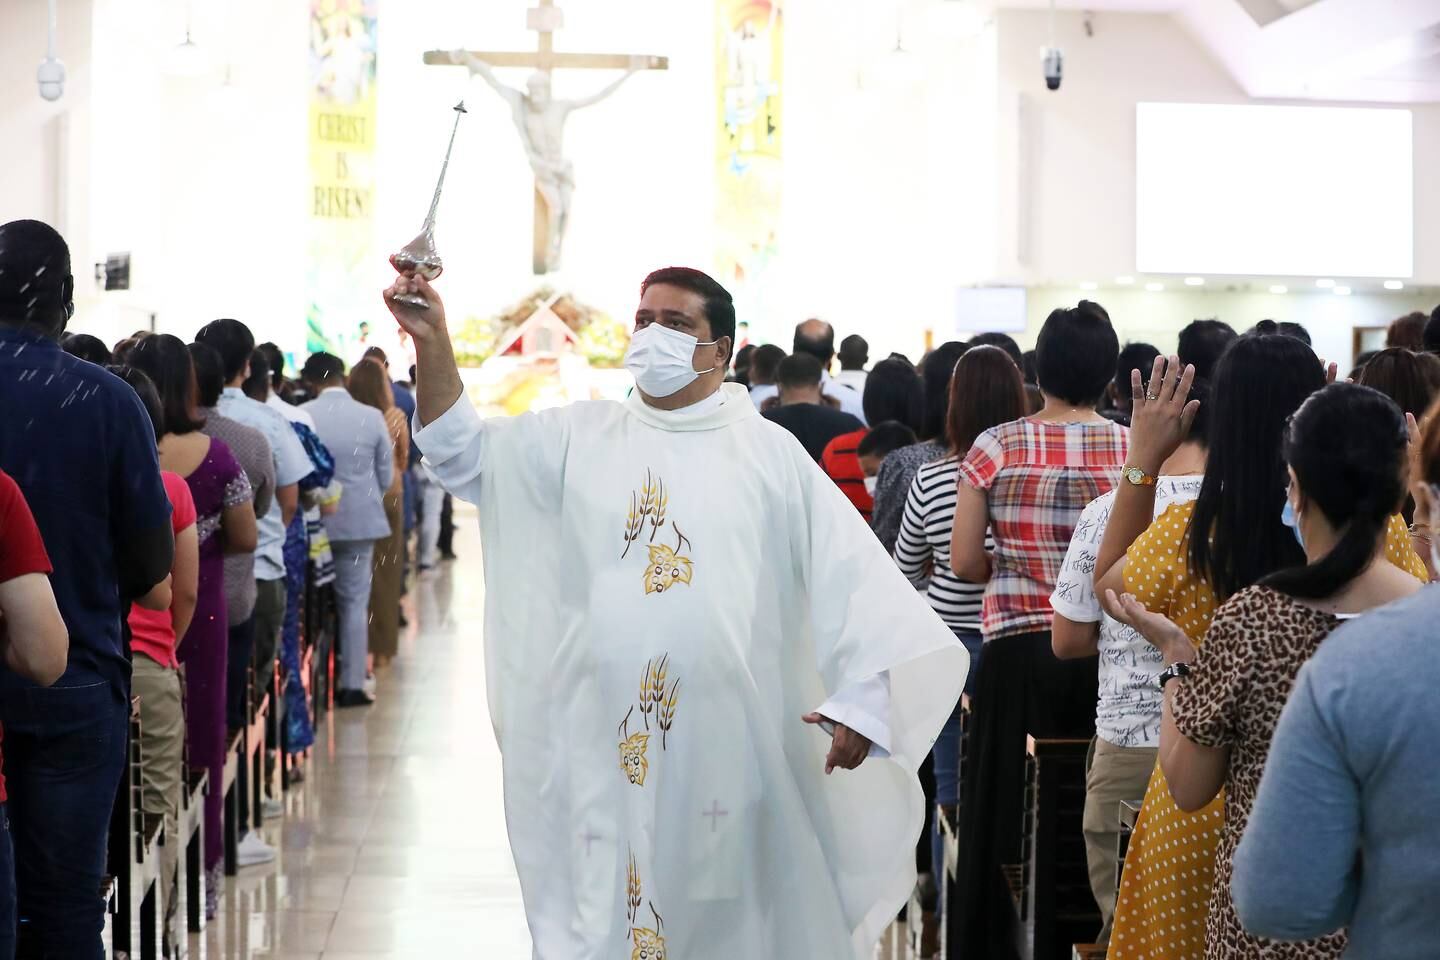 Father Andre during the Easter Sunday mass held at St Mary's Catholic Church in Dubai. Pawan Singh / The National